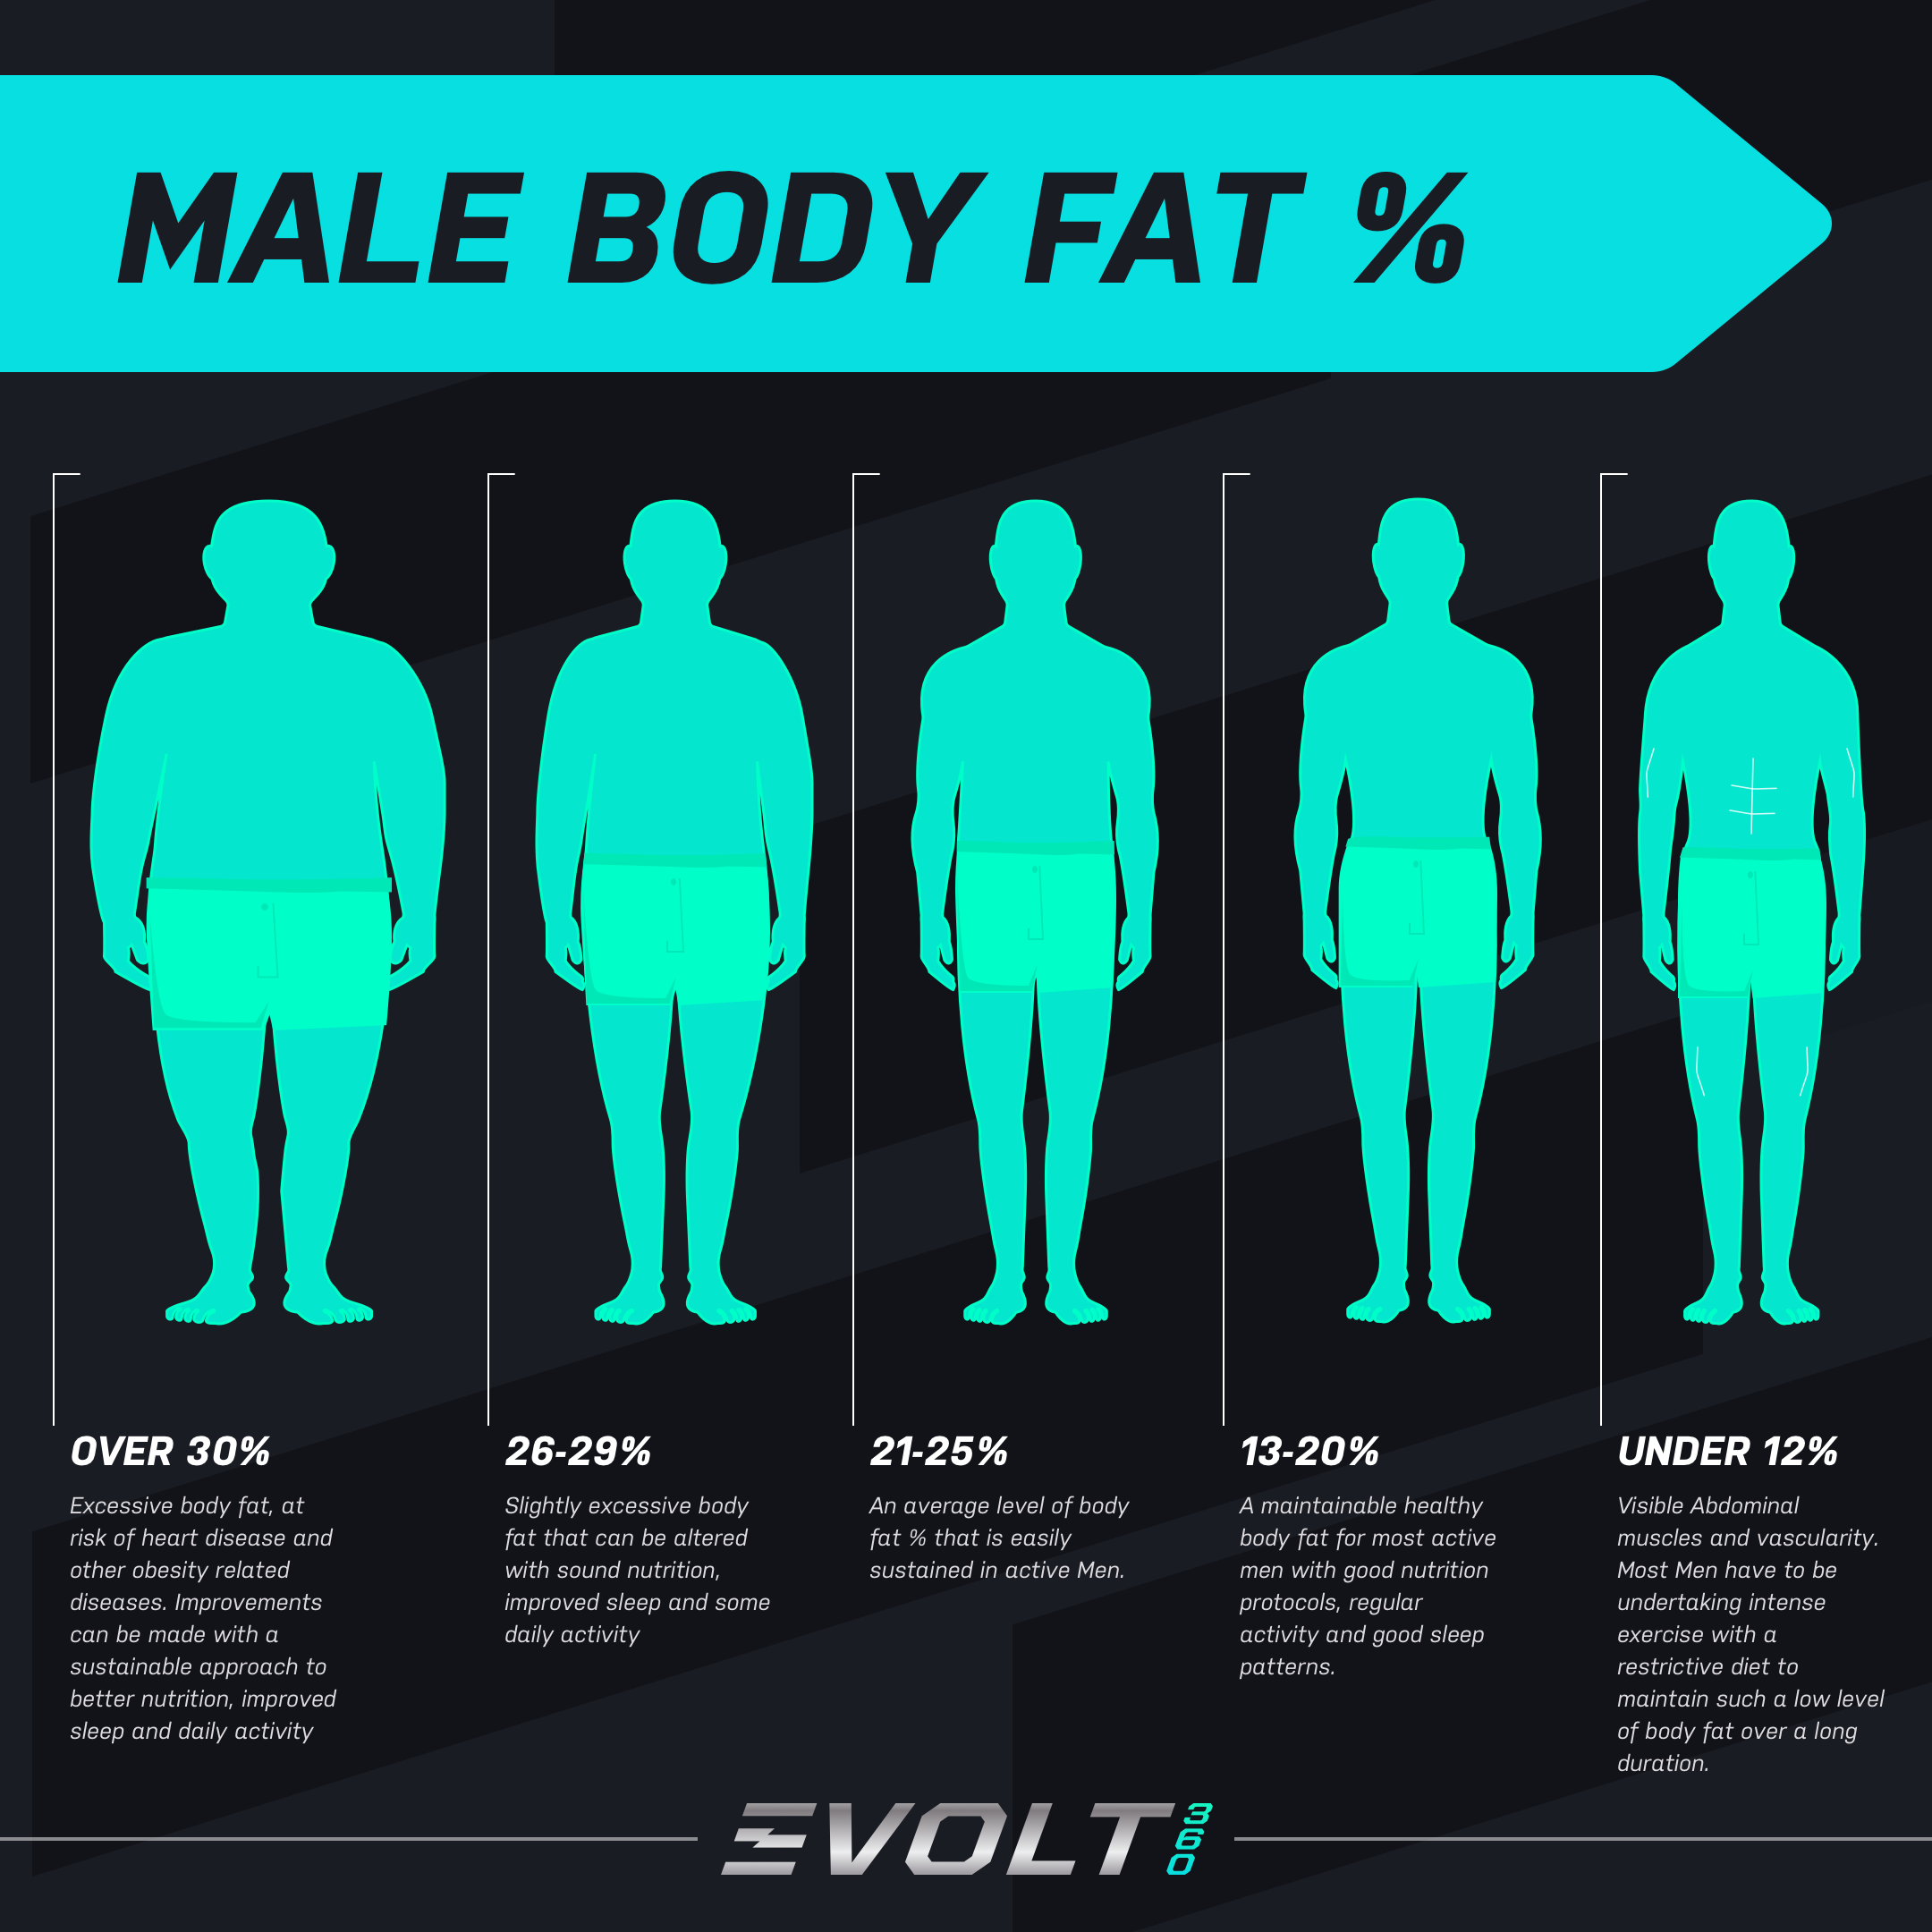 What is a healthy body fat percentage?